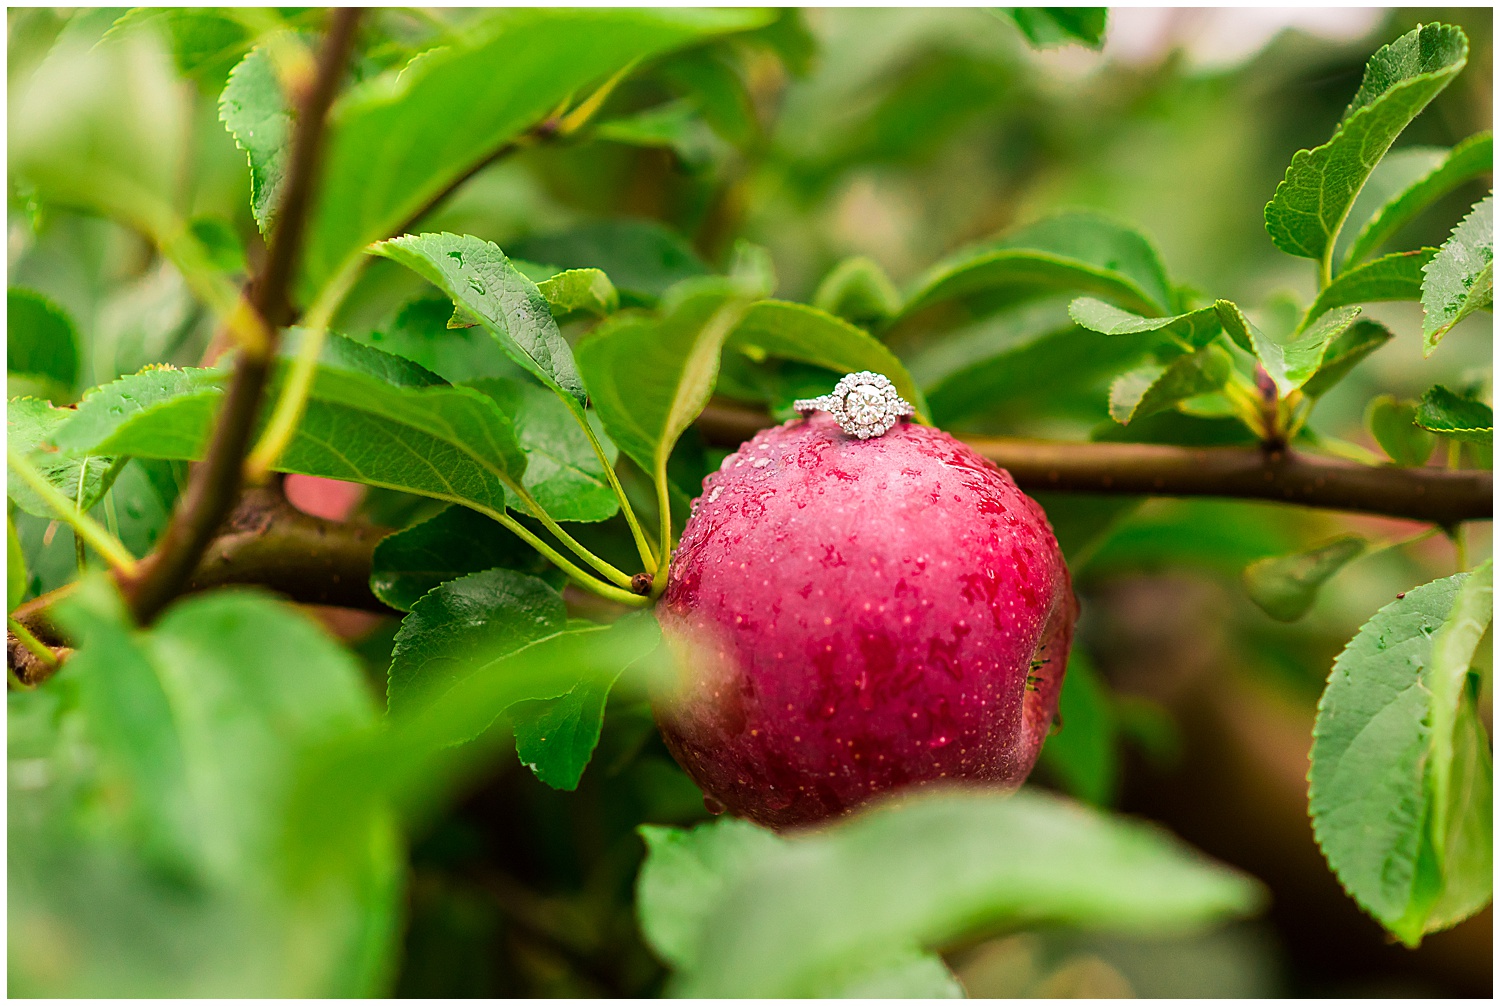 engagement ring on an apple